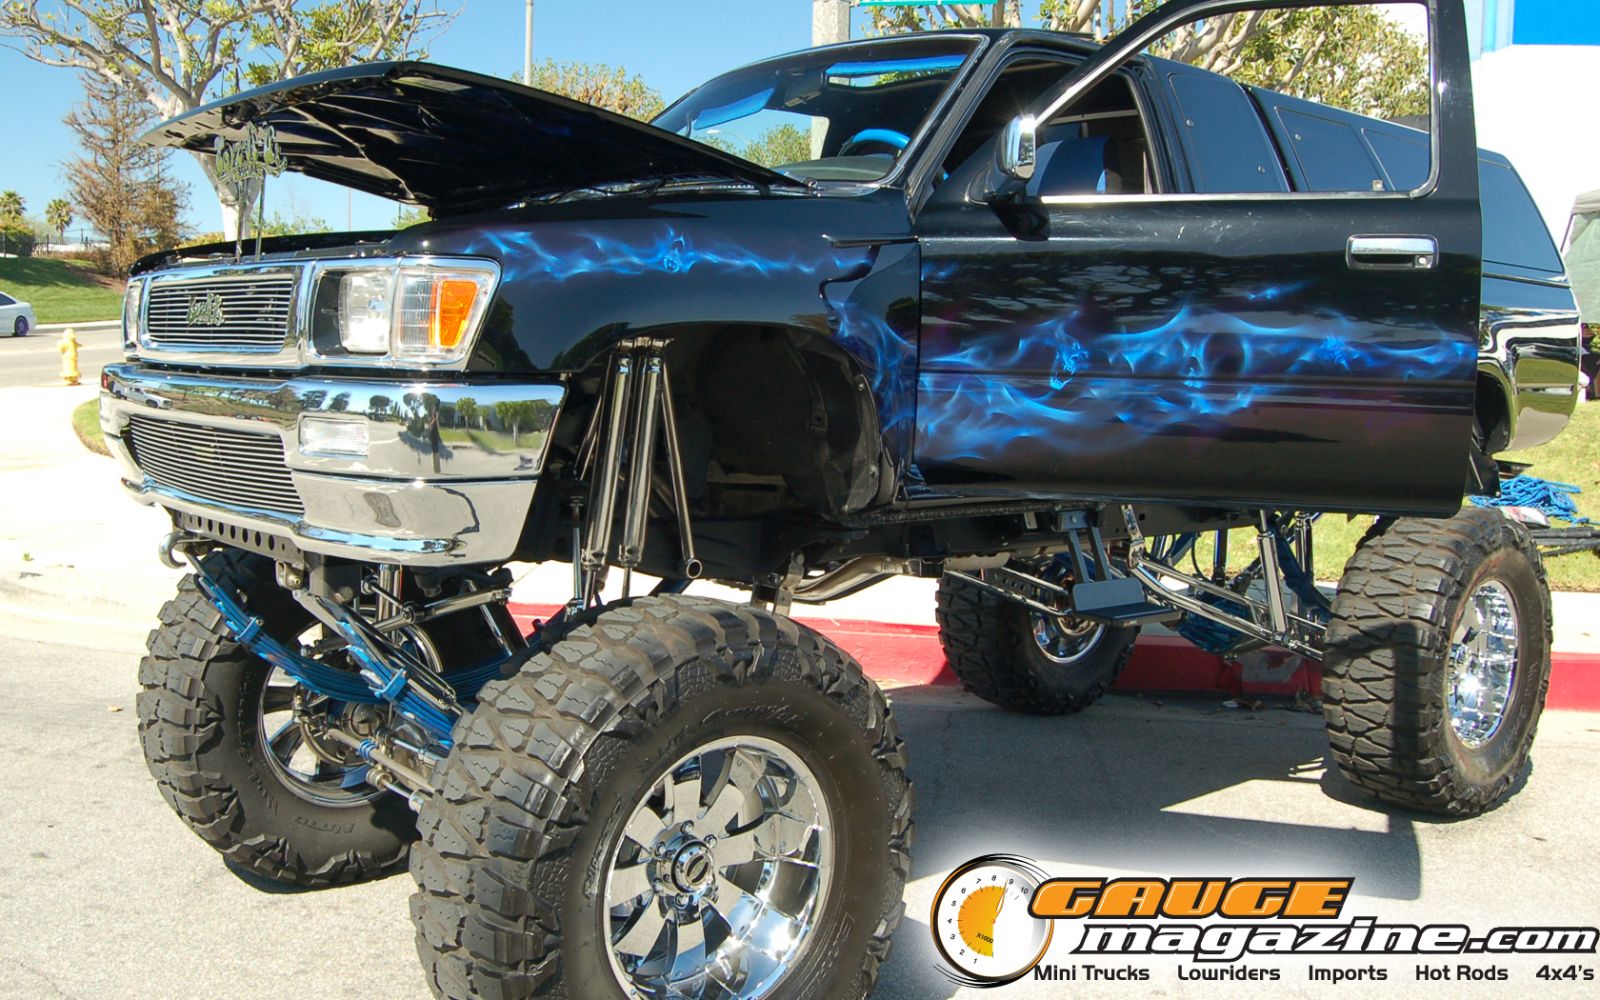 Gauge Magazine Toyota Truck Wallpaper From Relaxin In So Cal